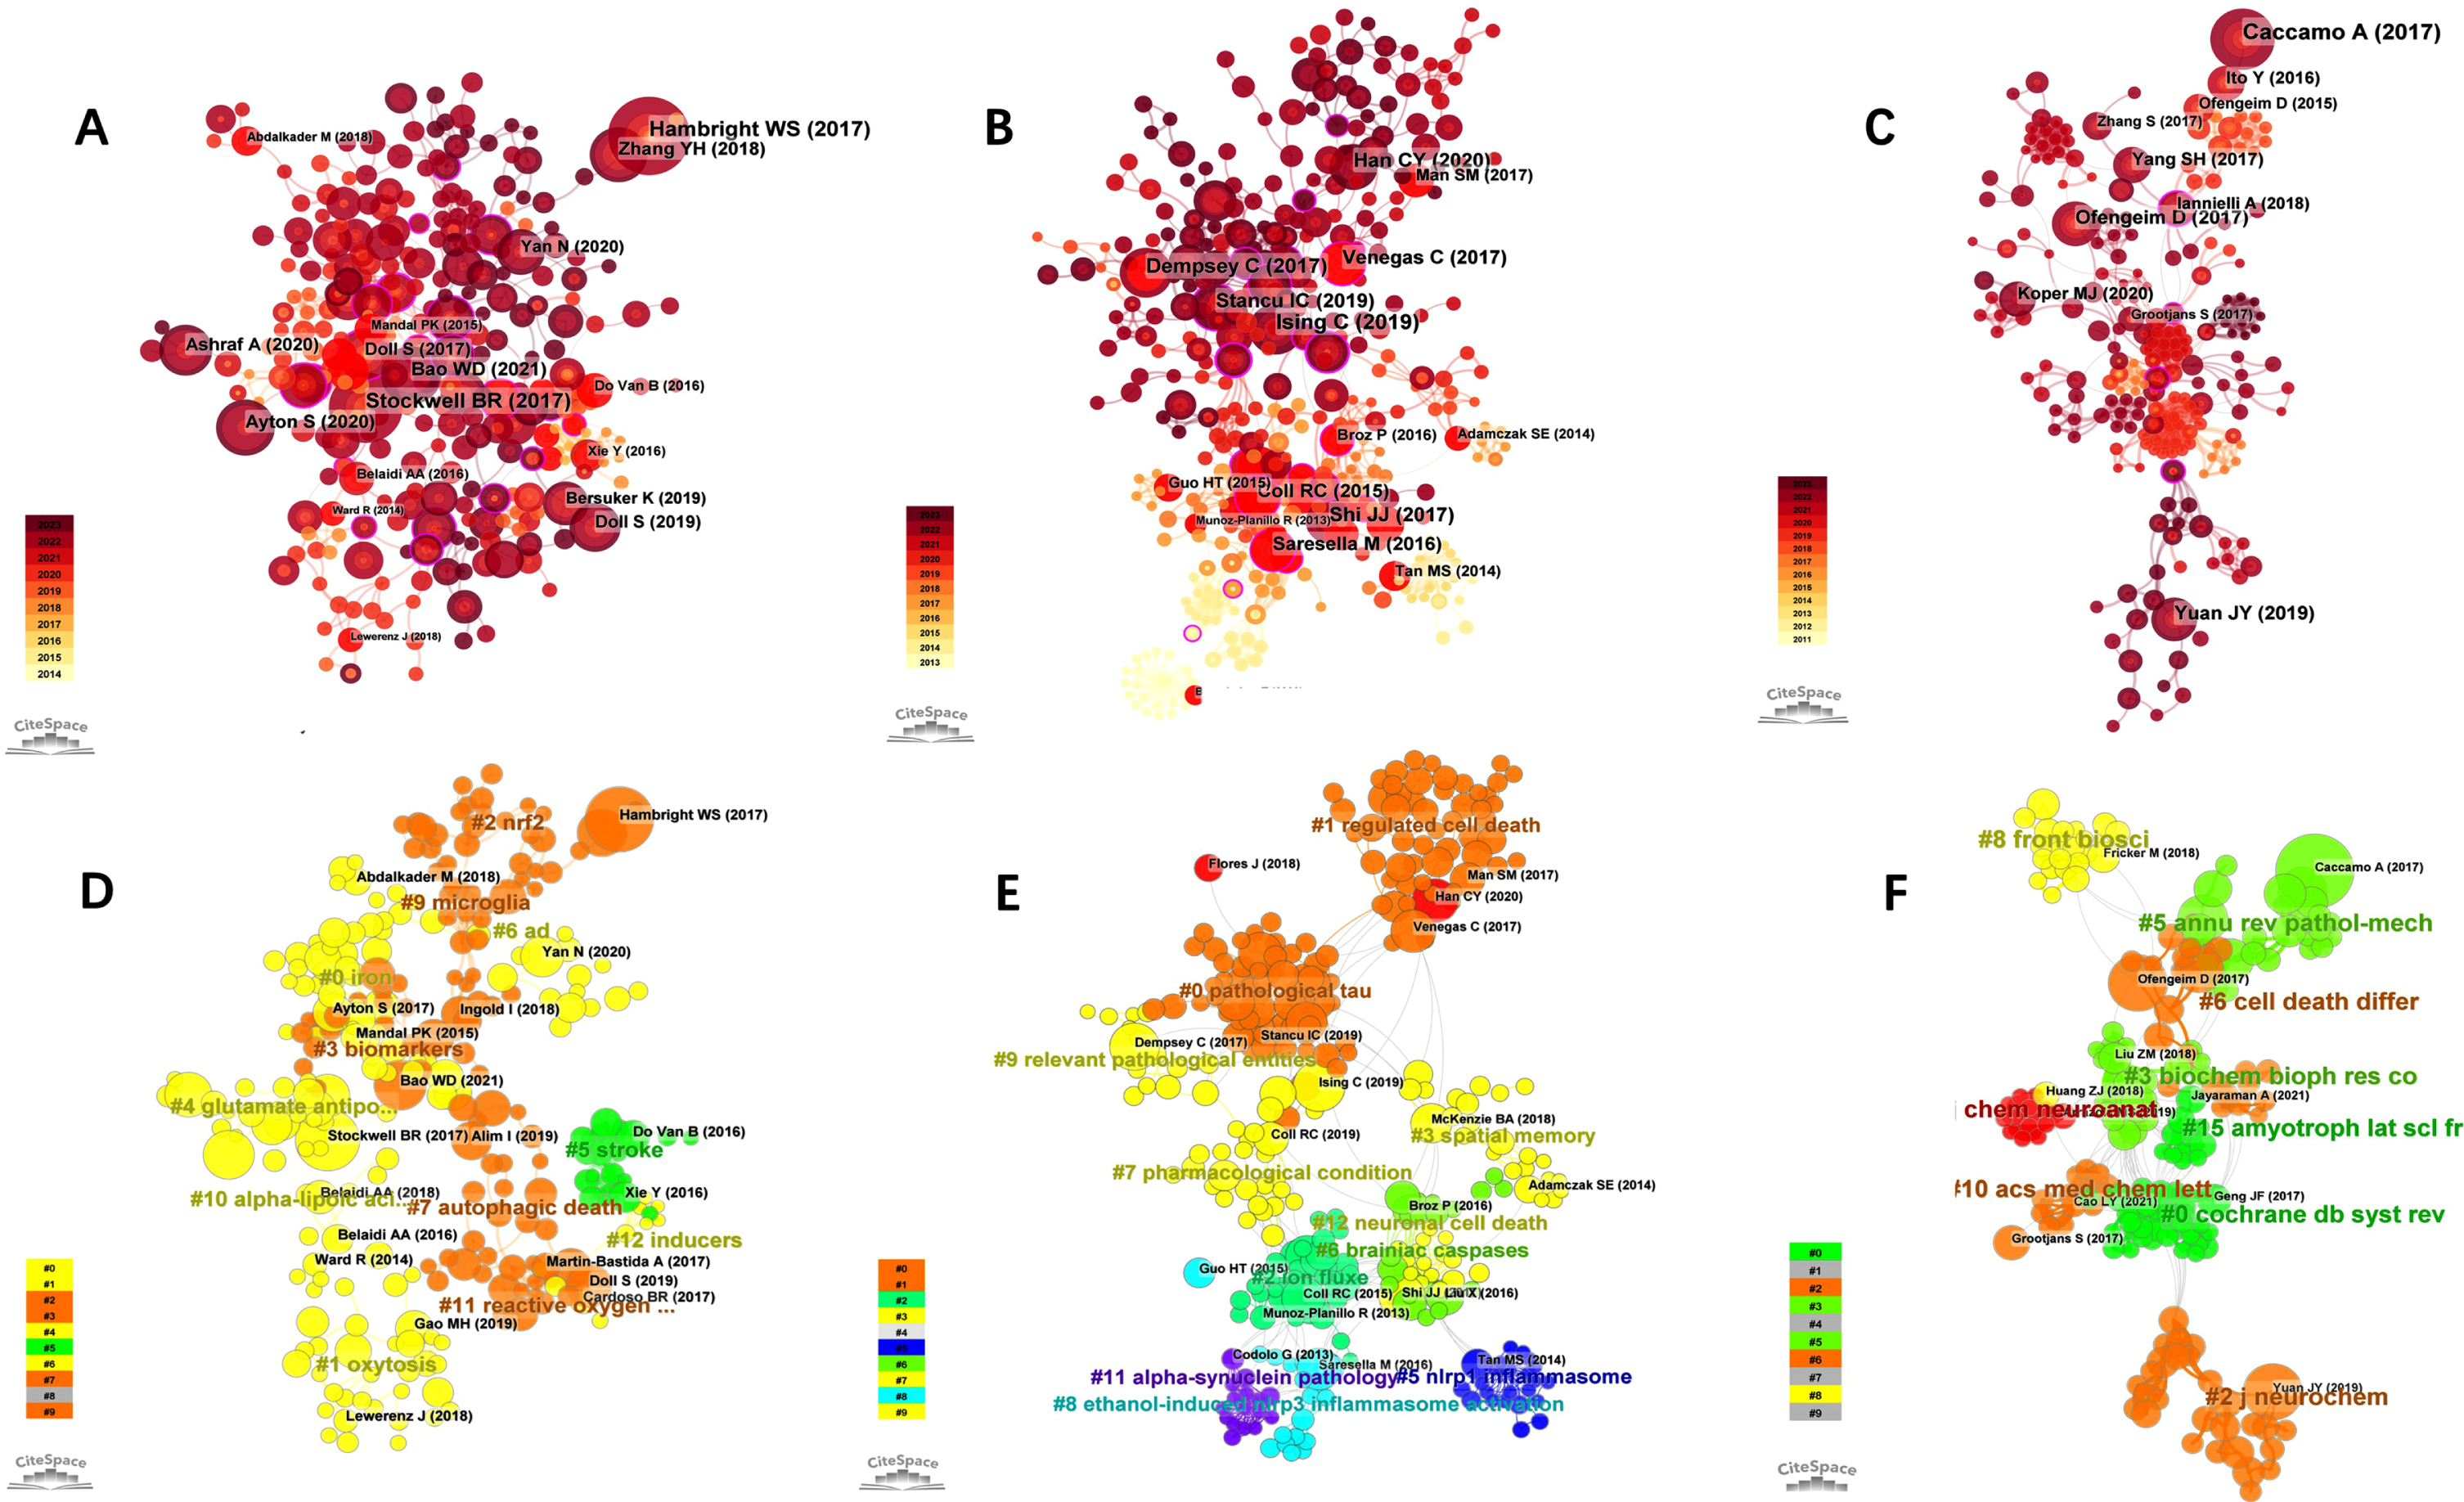 Visual analysis of most commonly cited references. Visualization of co-cited references related to “Ferroptosis in AD” (A), “Pyroptosis in AD” (B), and “Necroptosis in AD” (C). A-C) Nodes are sized according to the number of citations. Cluster analysis of co-cited references related to “Ferroptosis in AD” (D), “Pyroptosis in AD” (E), and “Necroptosis in AD” (F).